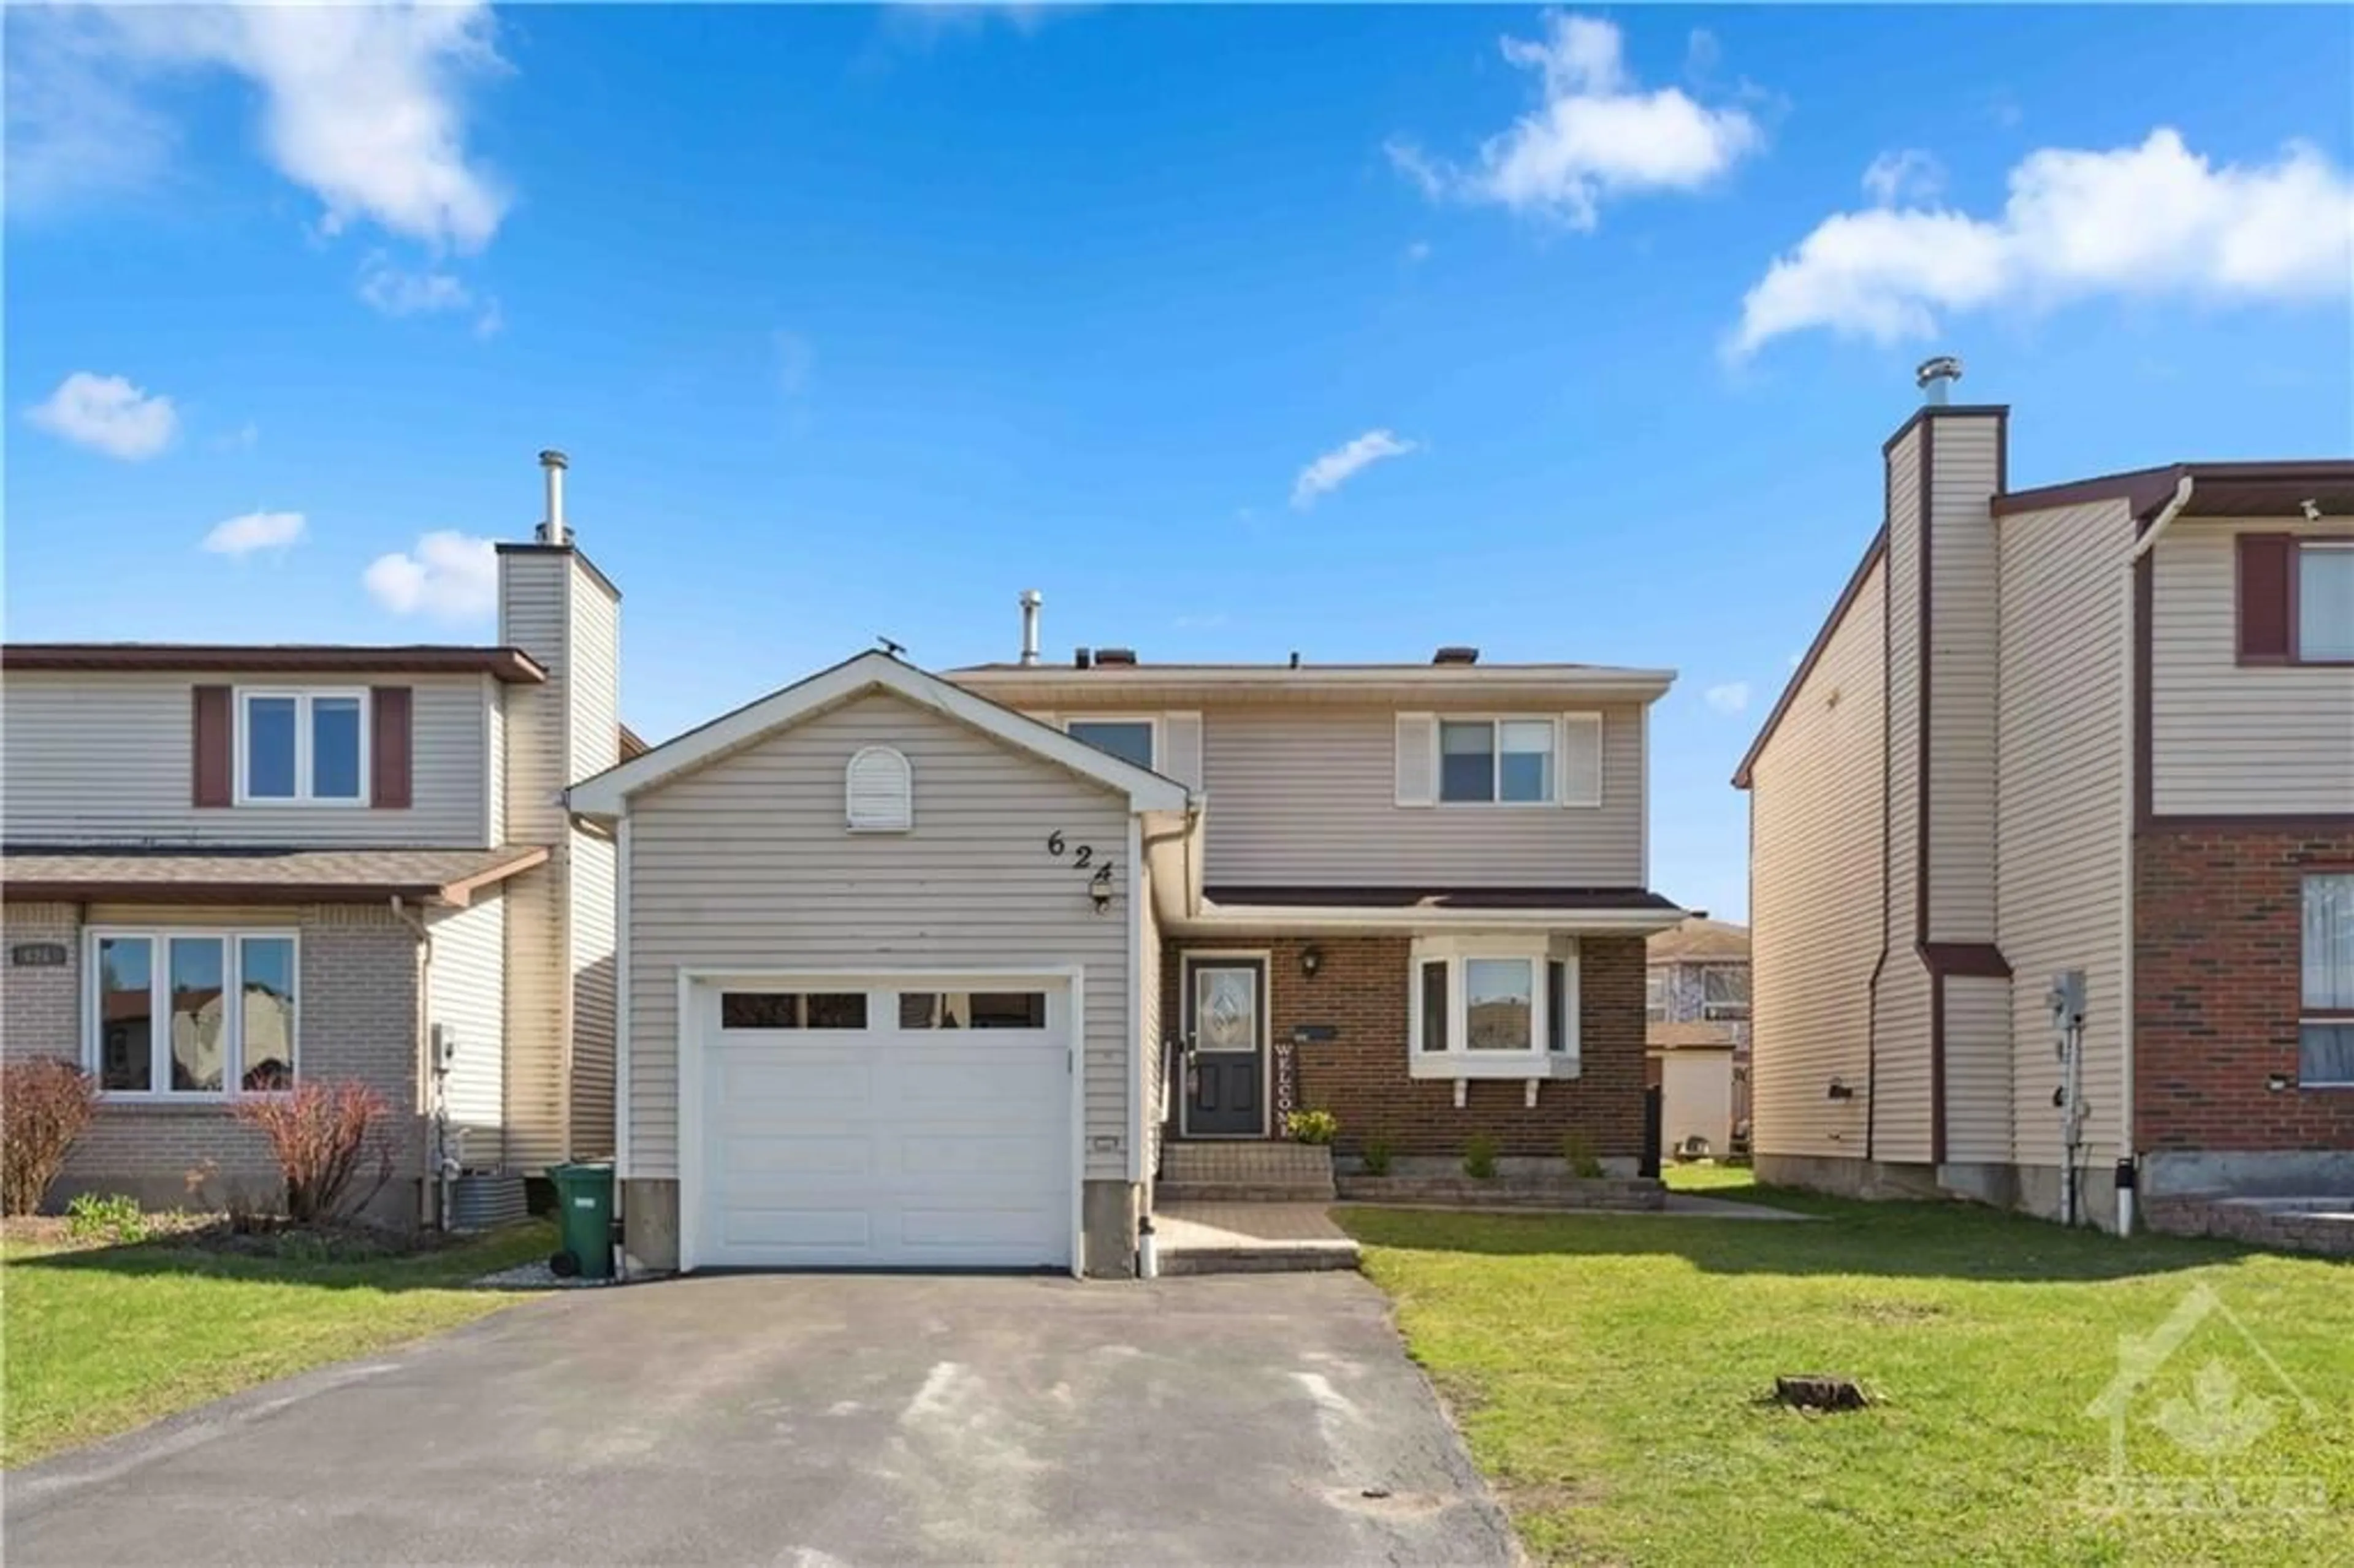 Frontside or backside of a home for 624 WILKIE Dr, Ottawa Ontario K4A 1R7